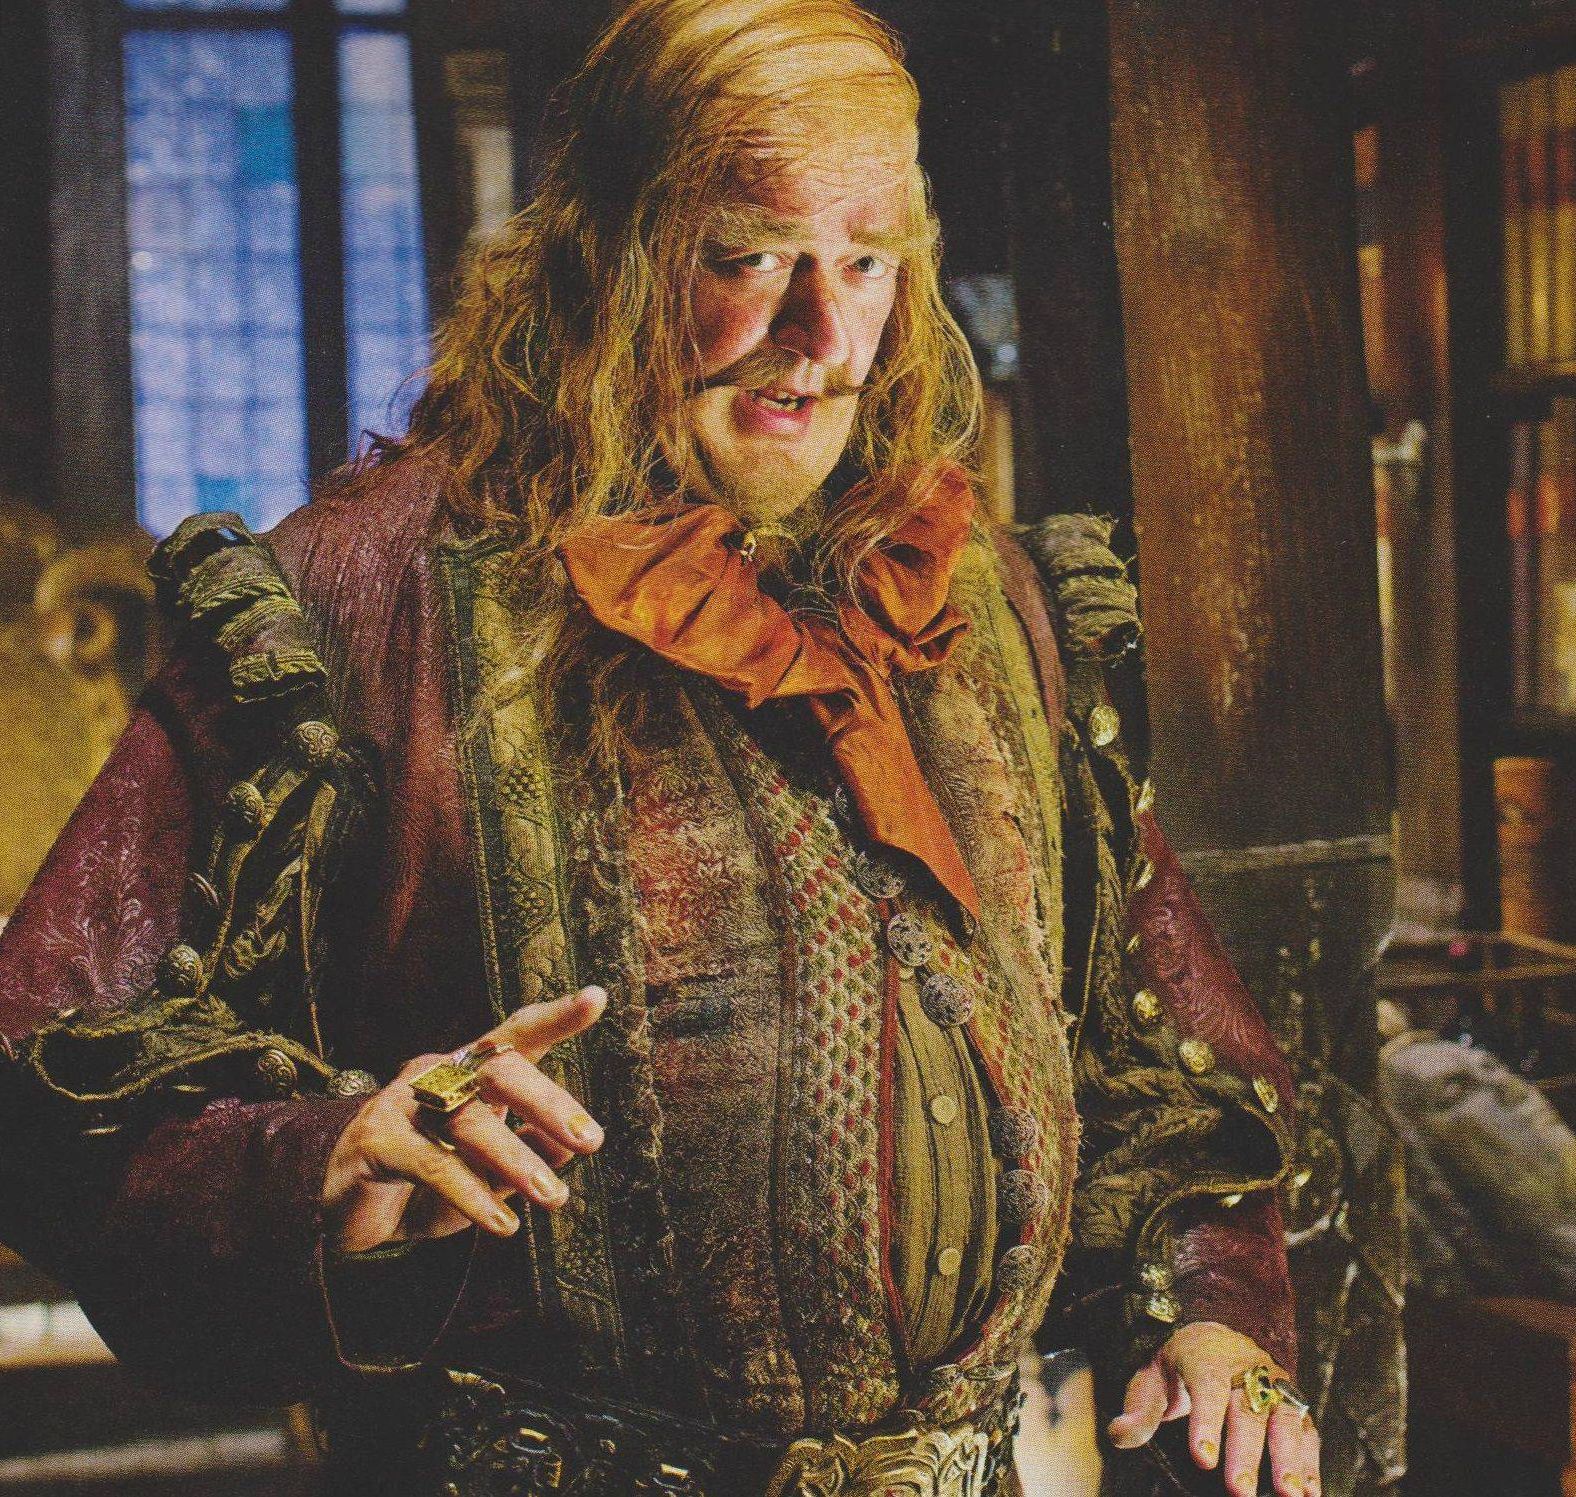 Stephen Fry as the Master Of Laketown